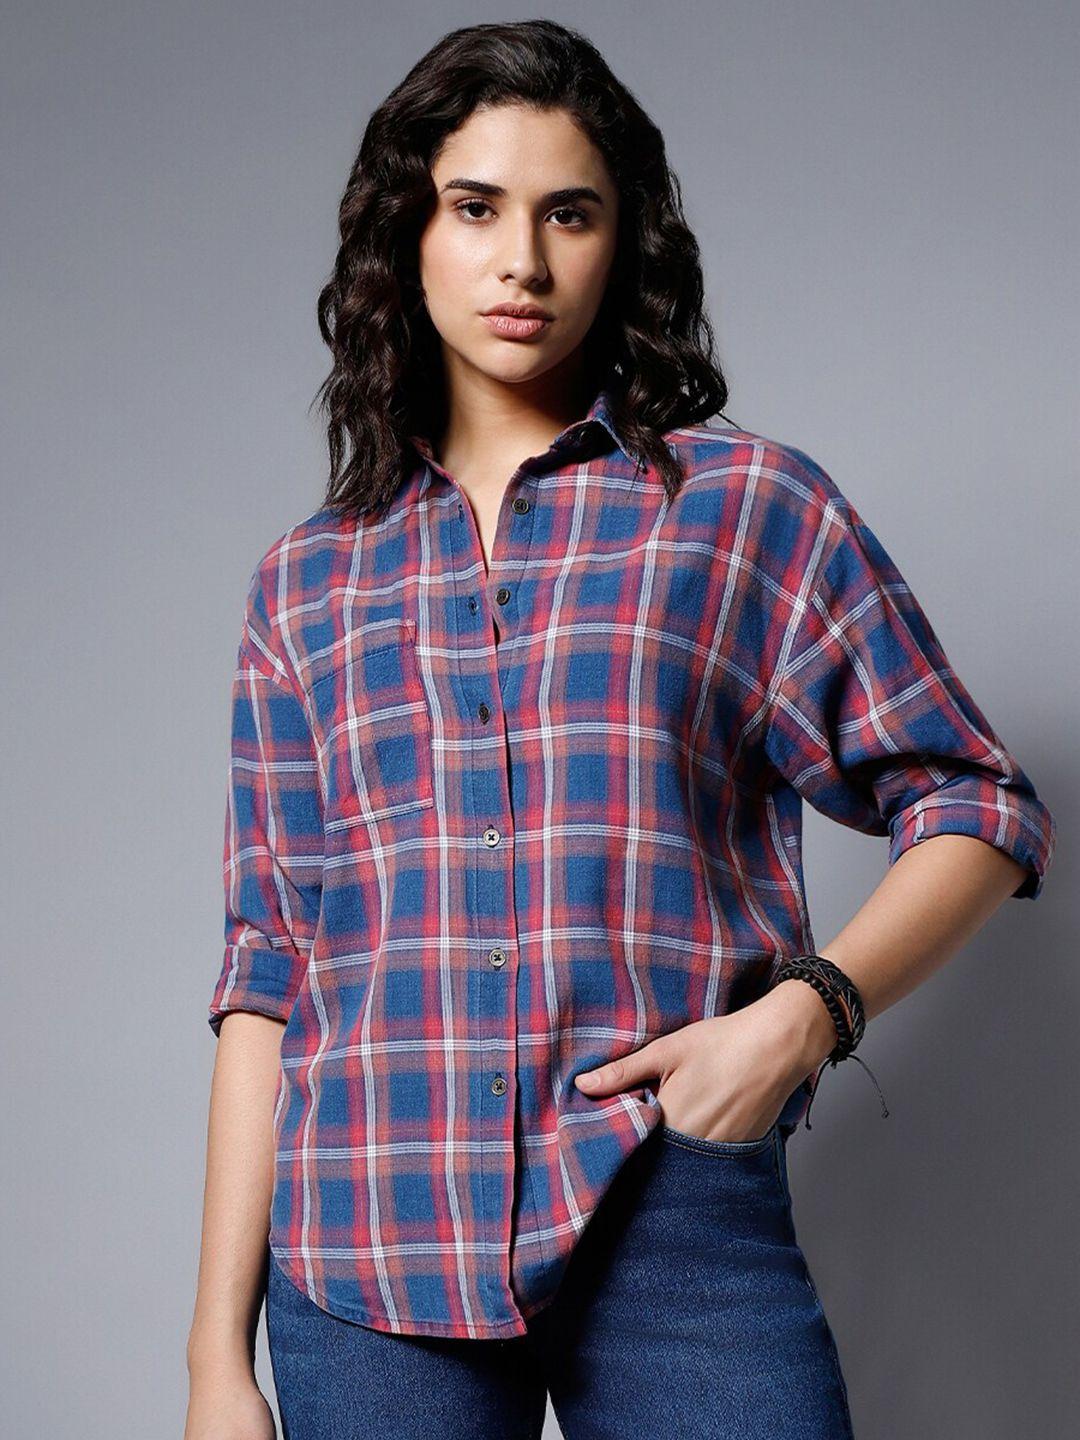 high-star-classic-checked-spread-collar-boxy-fit-pure-cotton-casual-shirt